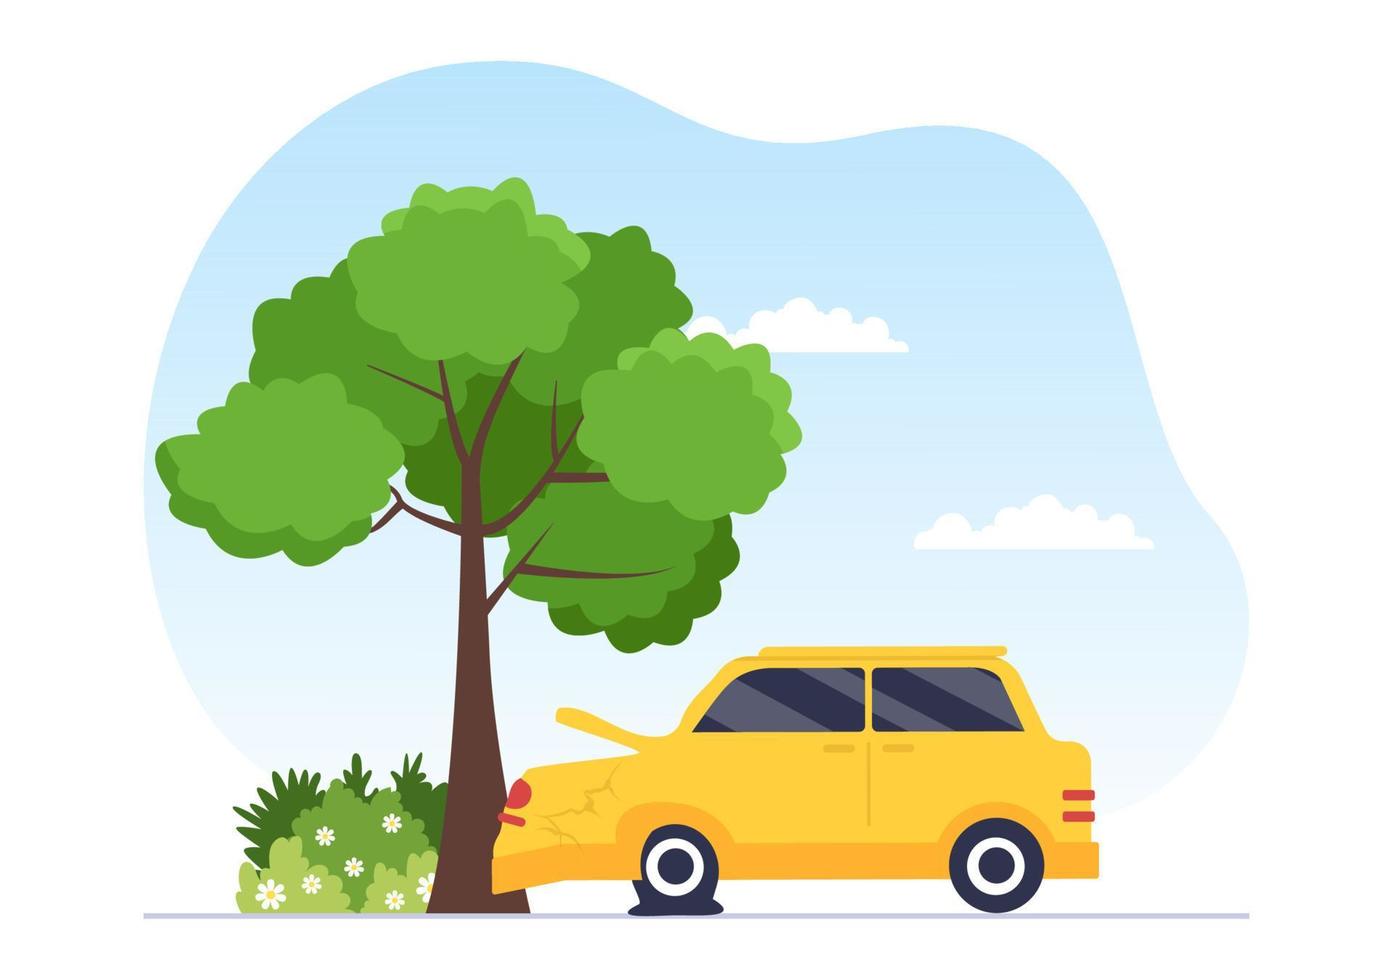 Car Accident Background Illustration with Two Cars Colliding or Hitting Something on the Road Causing Damage in Flat Style vector